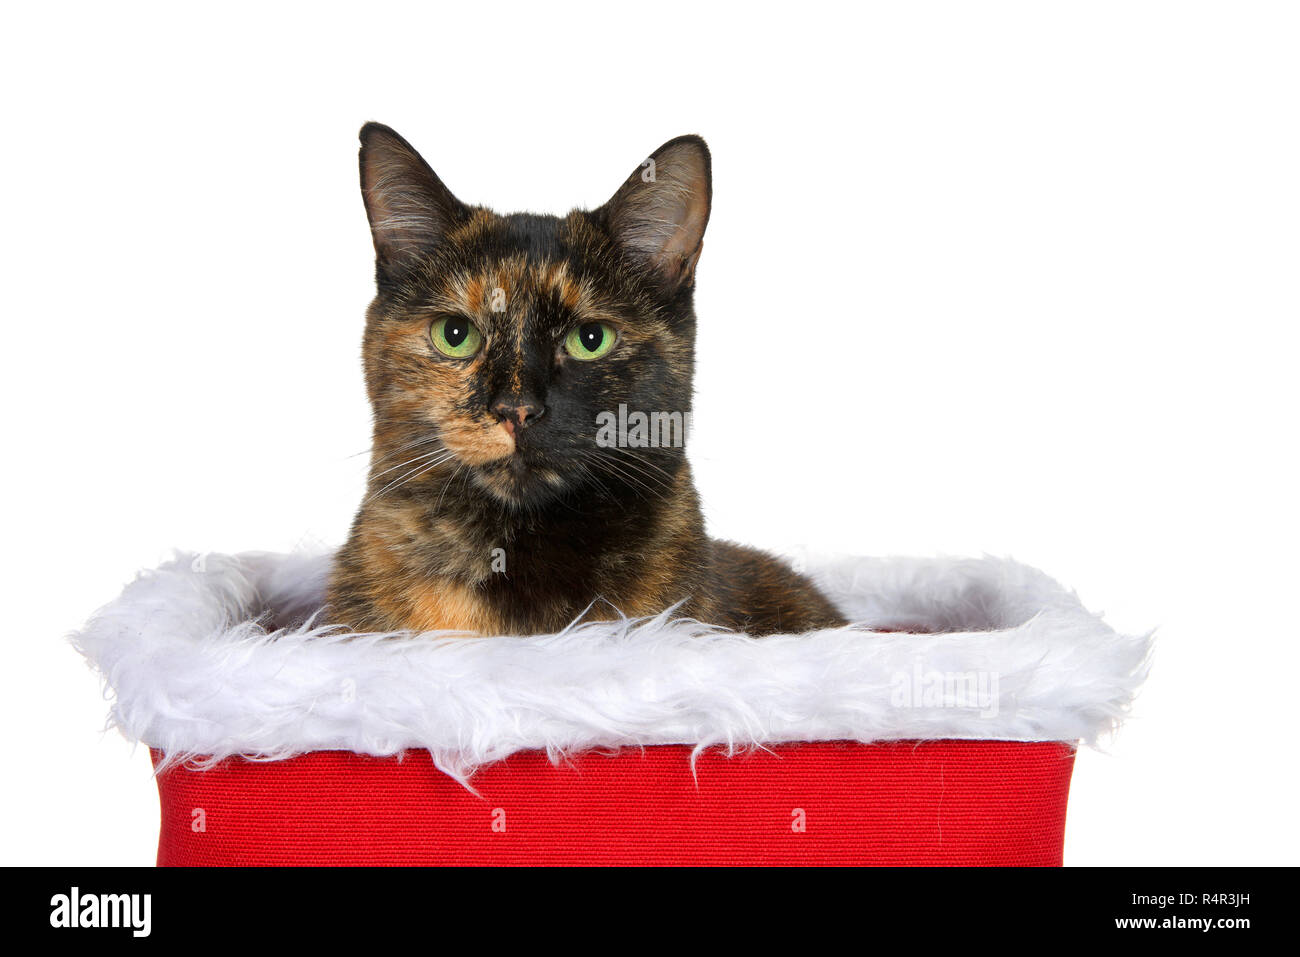 Portrait of a Torbie Tortie Tabby cat sitting in a fur lined Christmas basket looking directly at viewer. Isolated on white background. Stock Photo